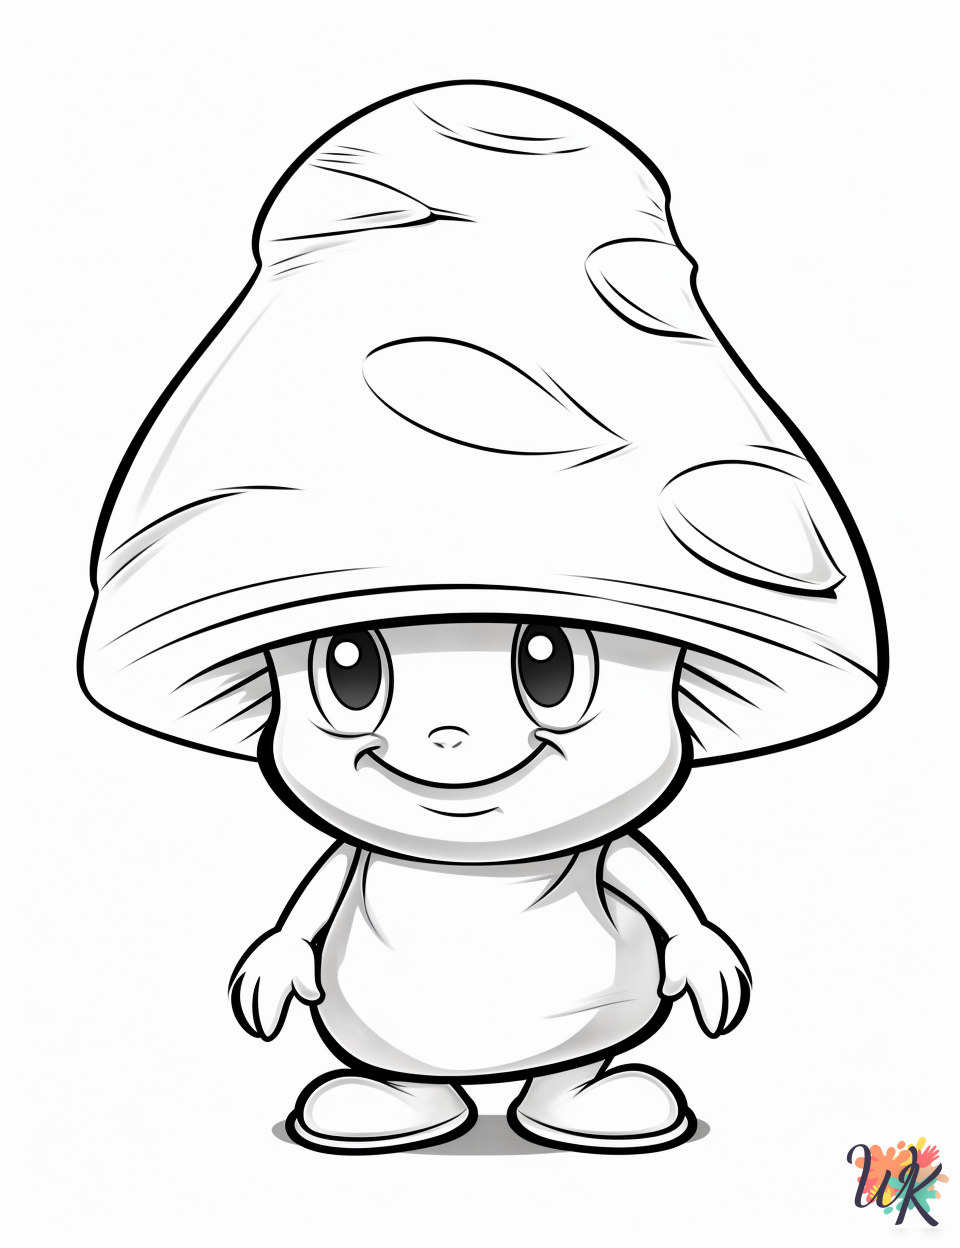 easy Mushroom coloring pages